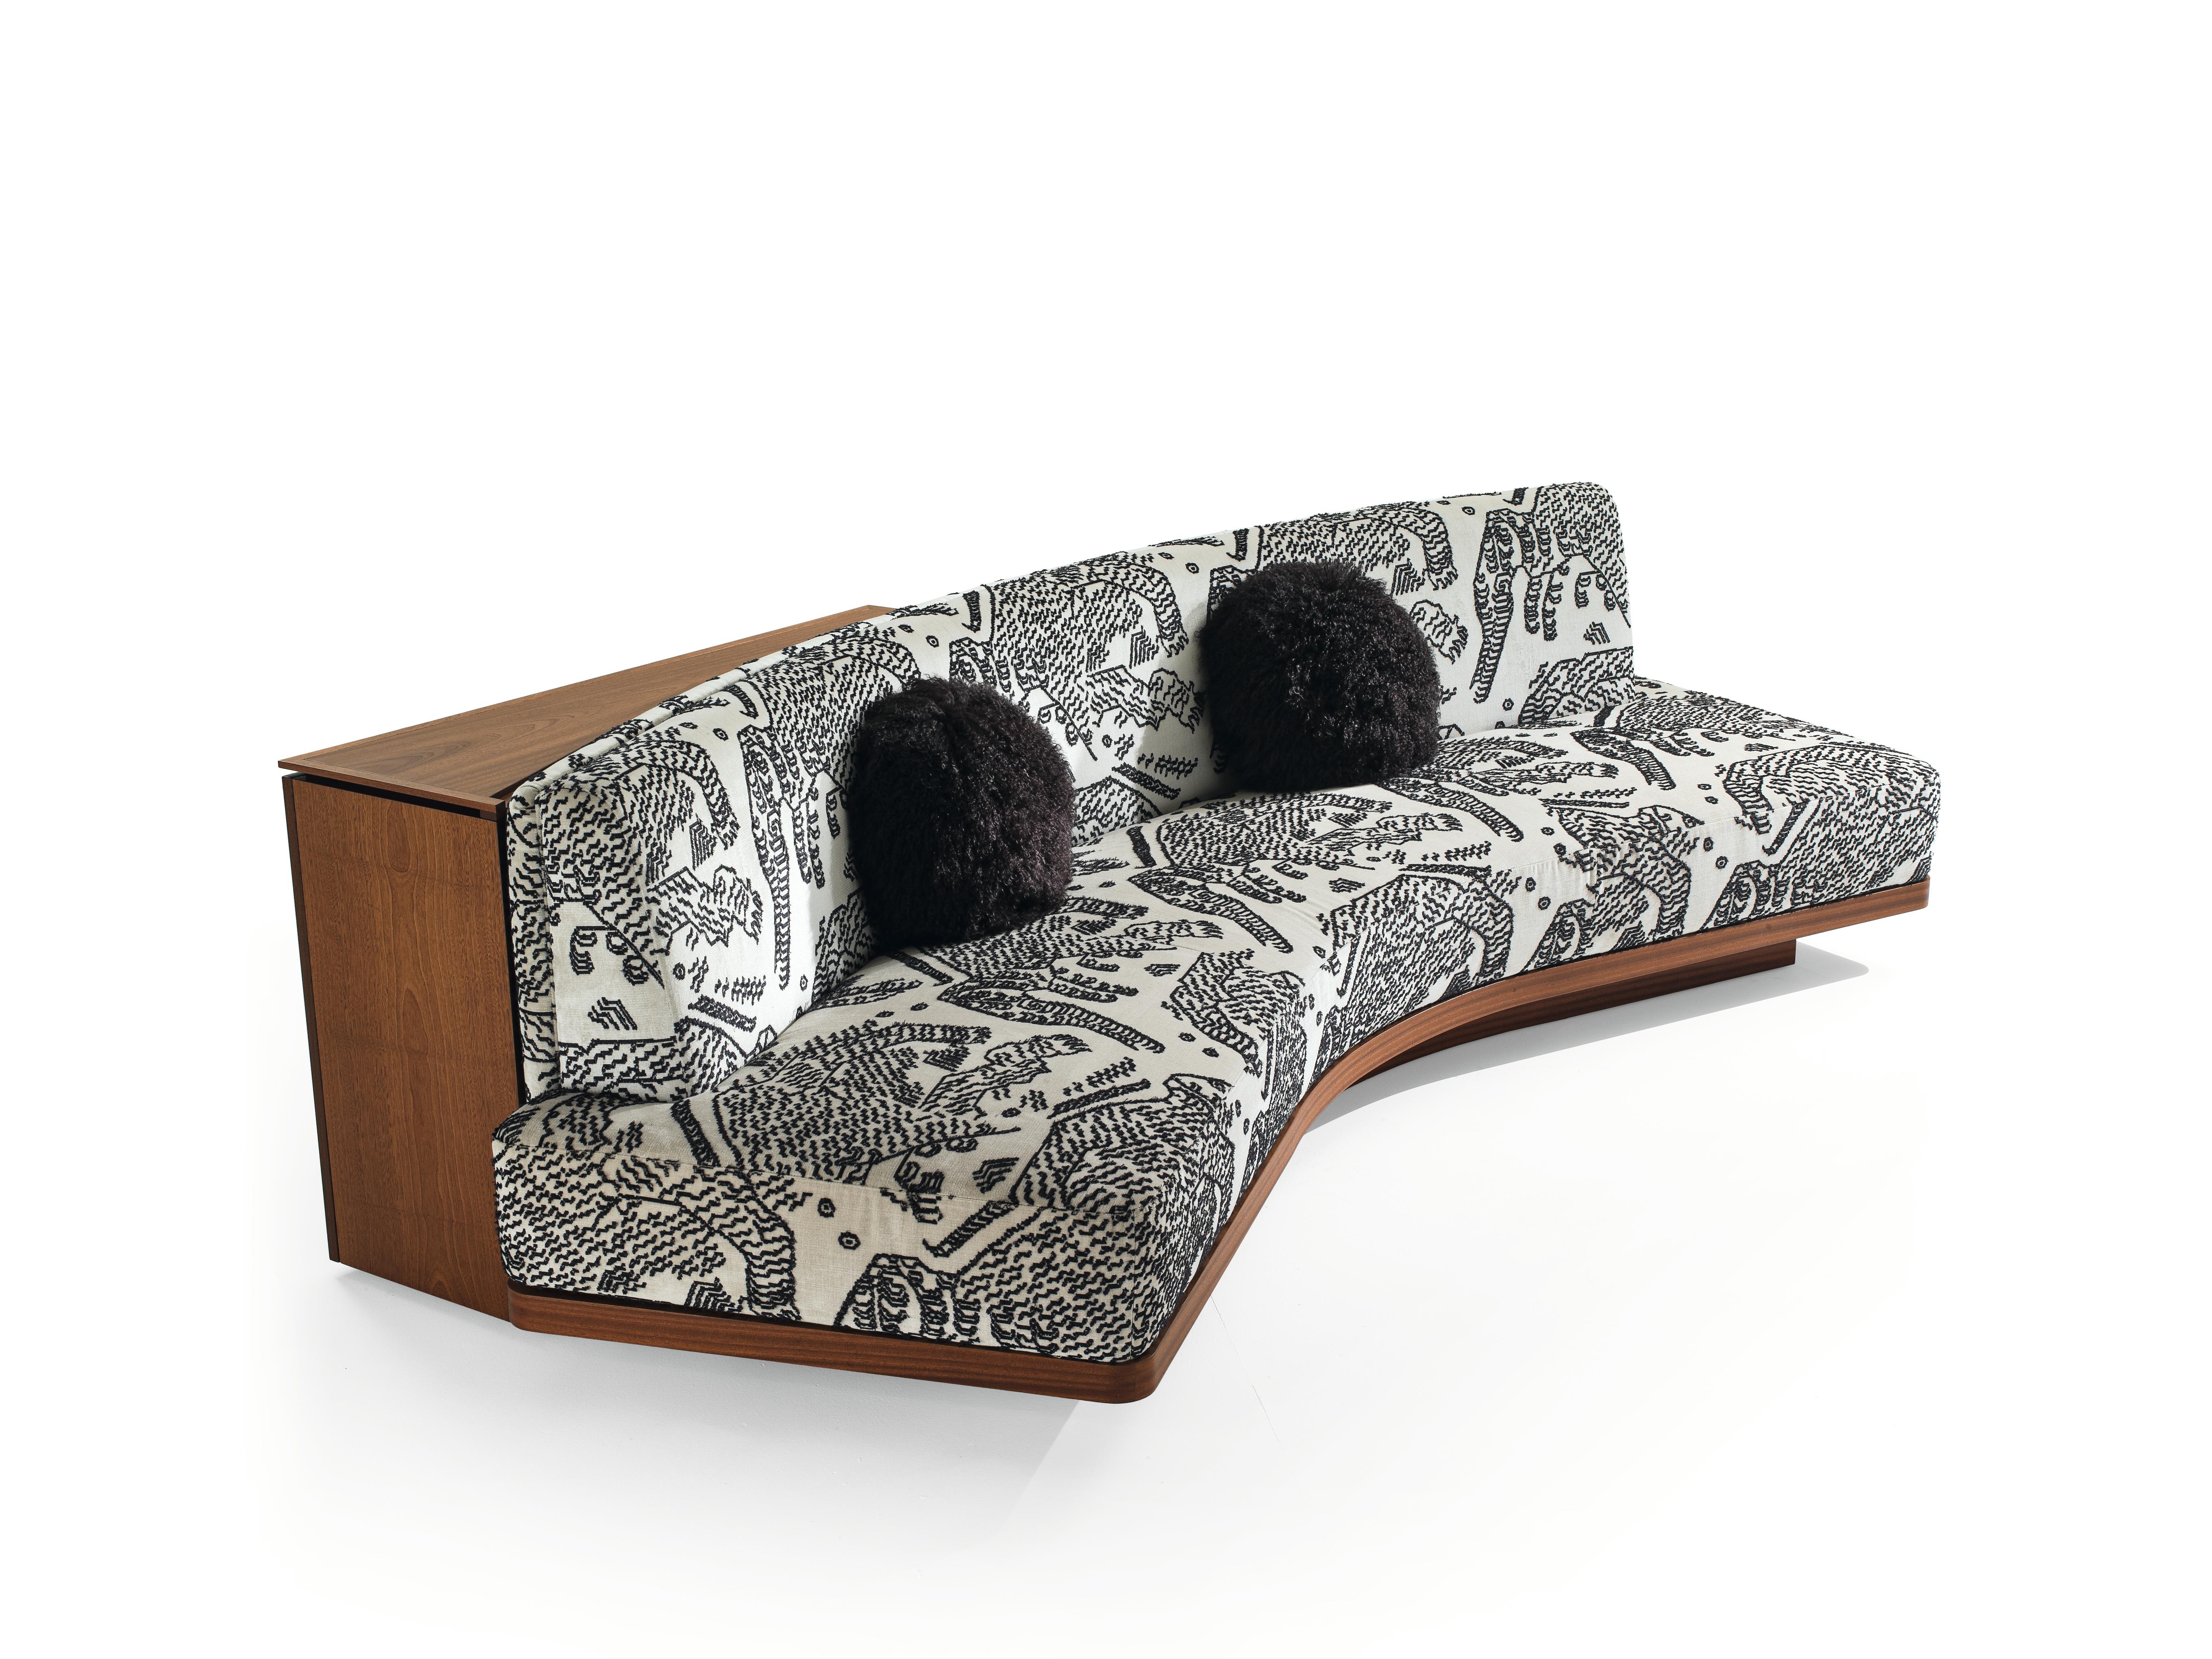 This exceptional sofa is adorned with a distinctive giraffe-striped inlay, inviting the untamed spirit of the wild into your living space. The sofa's structure features a back cabinet with two doors, offering a perfect blend of style and